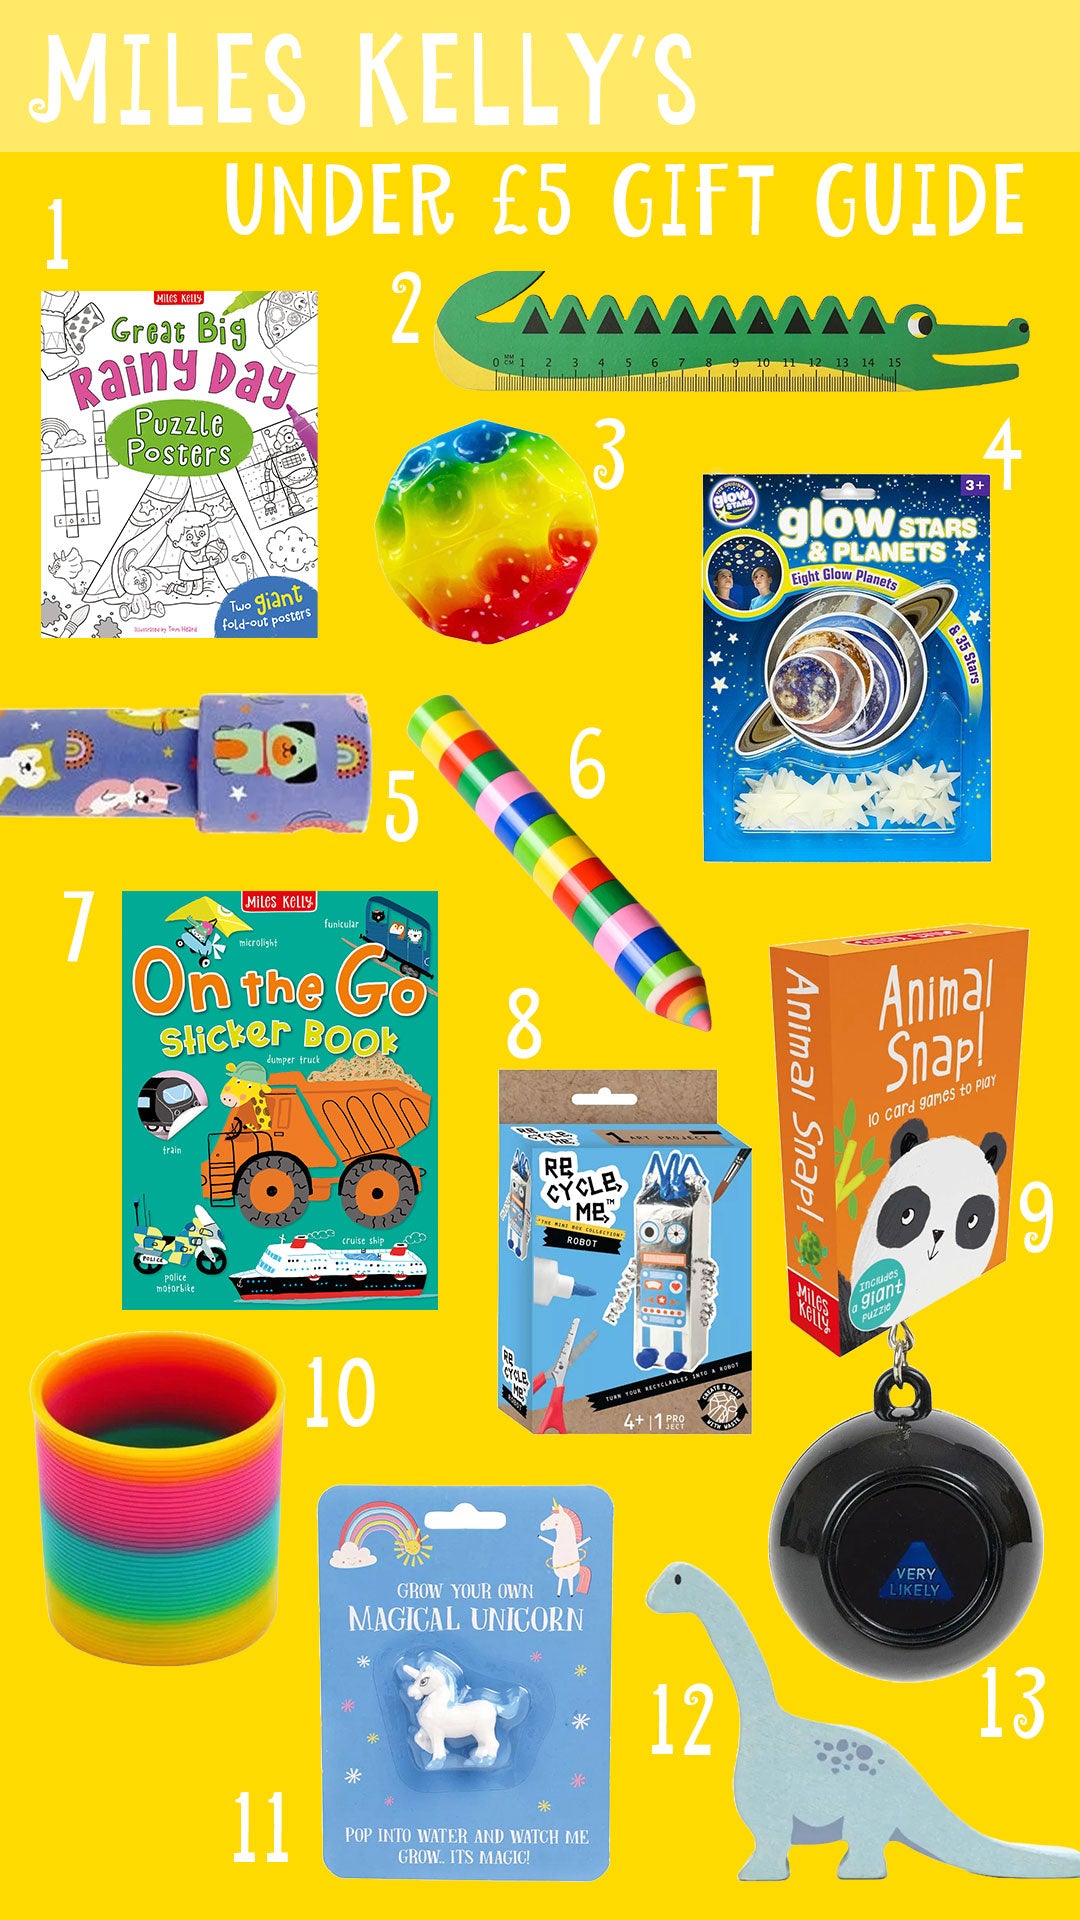 Xmas gifts and stocking fillers for kids under £5 – Miles Kelly Christmas Gift Guide